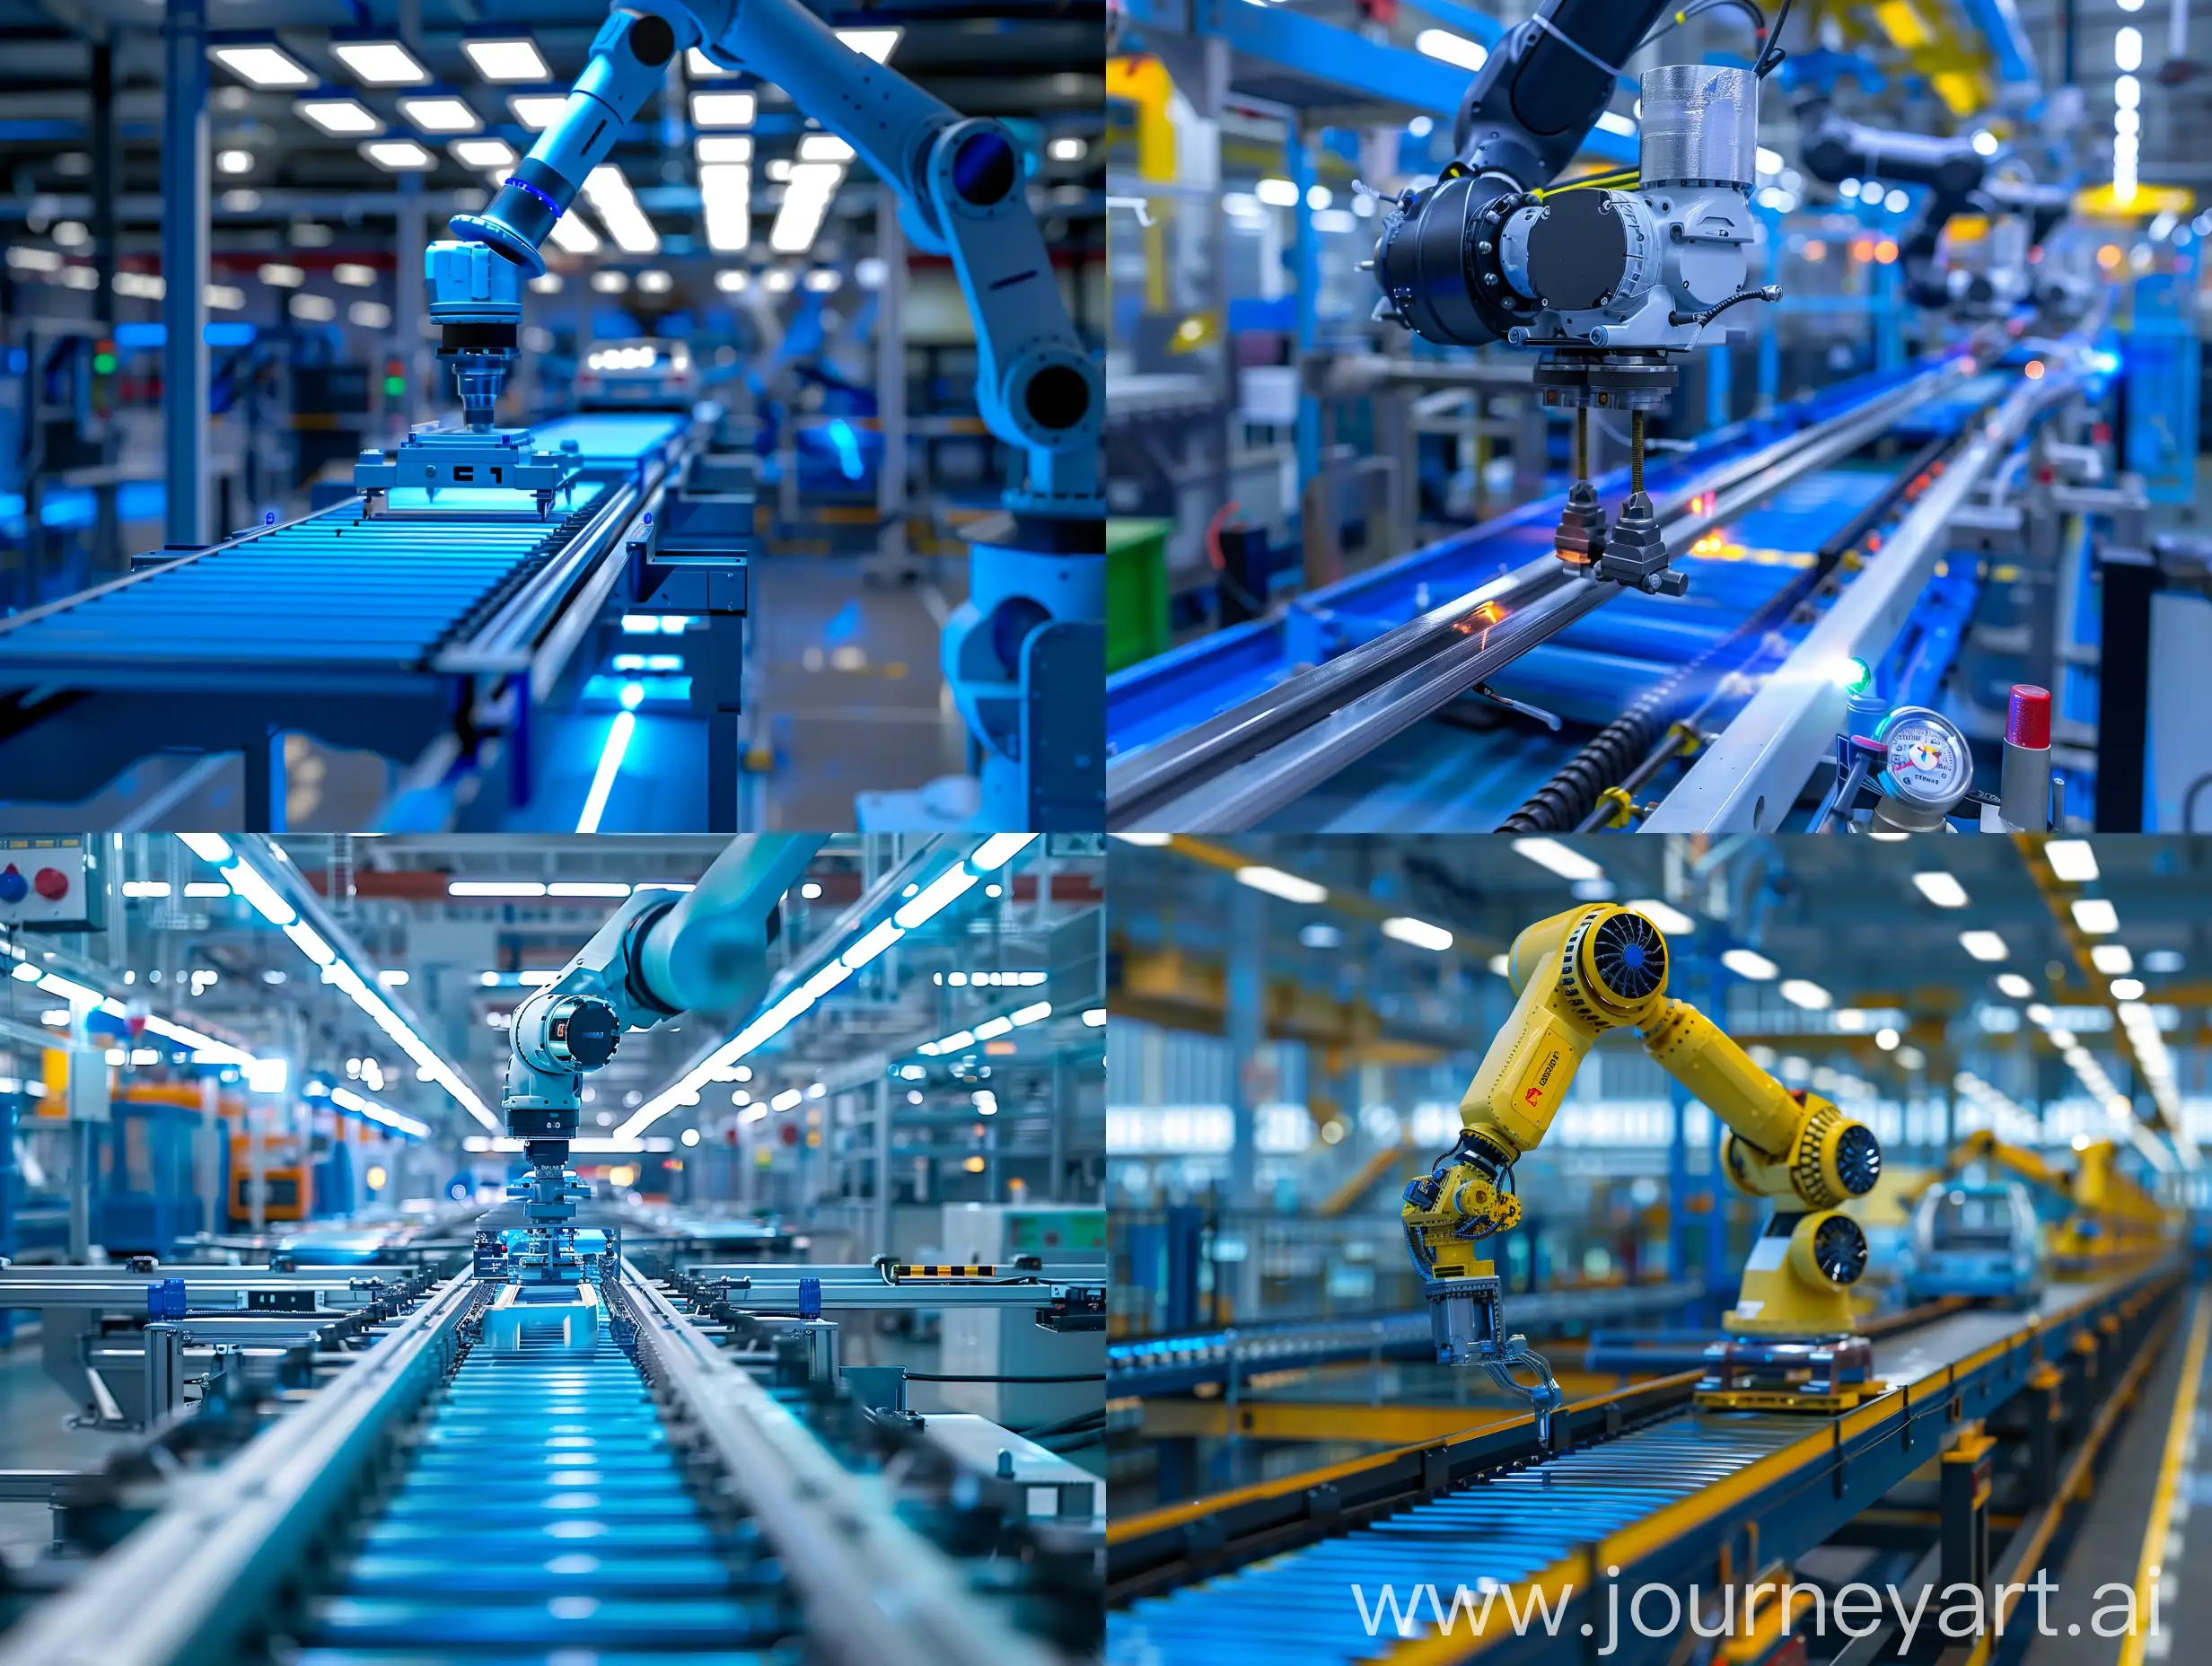 Modern-Car-Factory-Conveyor-Line-with-Automated-Robot-Arm-in-Photorealistic-Blue-Setting